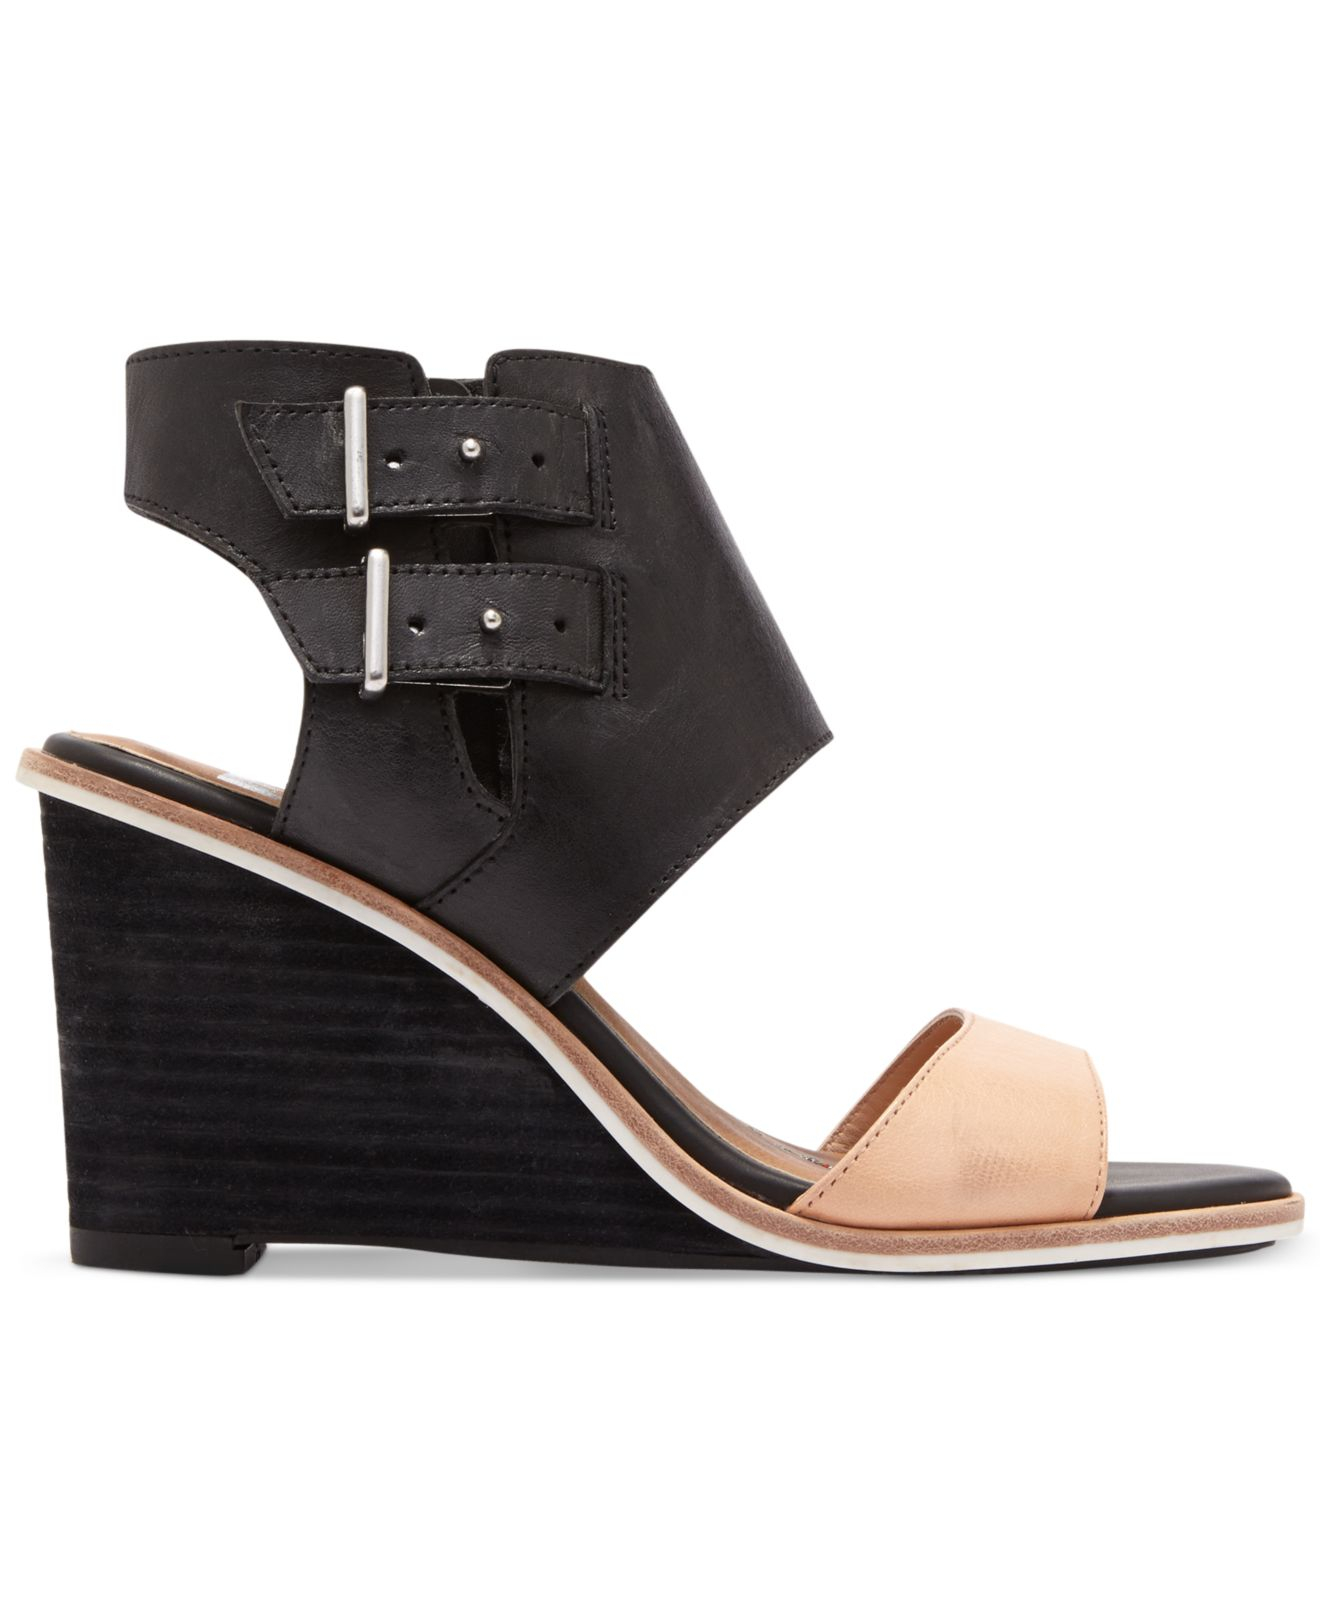 Dolce Vita Dv By Cambria Wedge Sandals in Black - Lyst